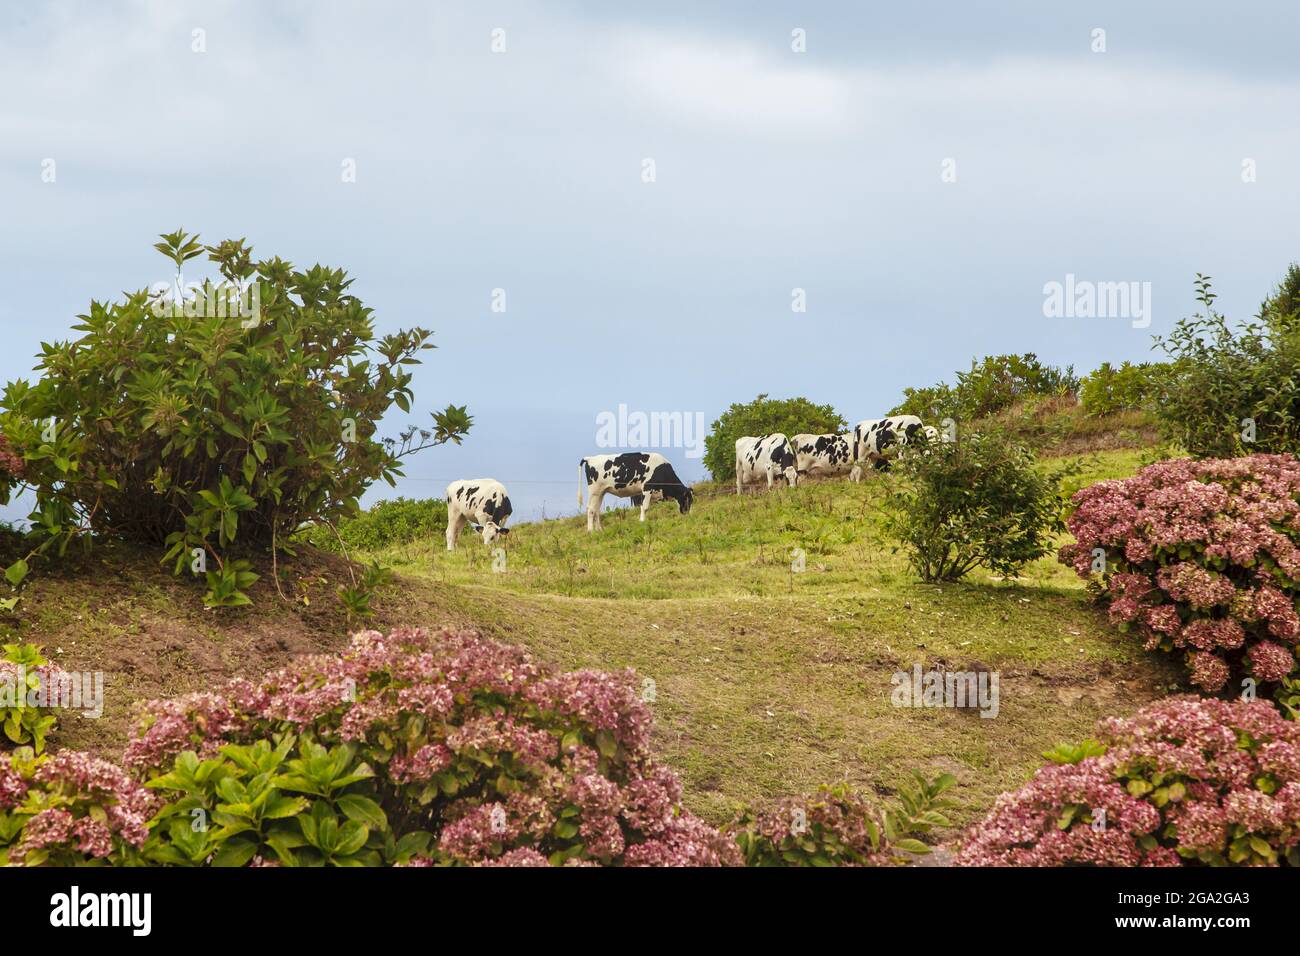 Holstein cows (Bos taurus taurus) grazing in a field next to flowering bushes; Sao Miguel Island, Azores Stock Photo